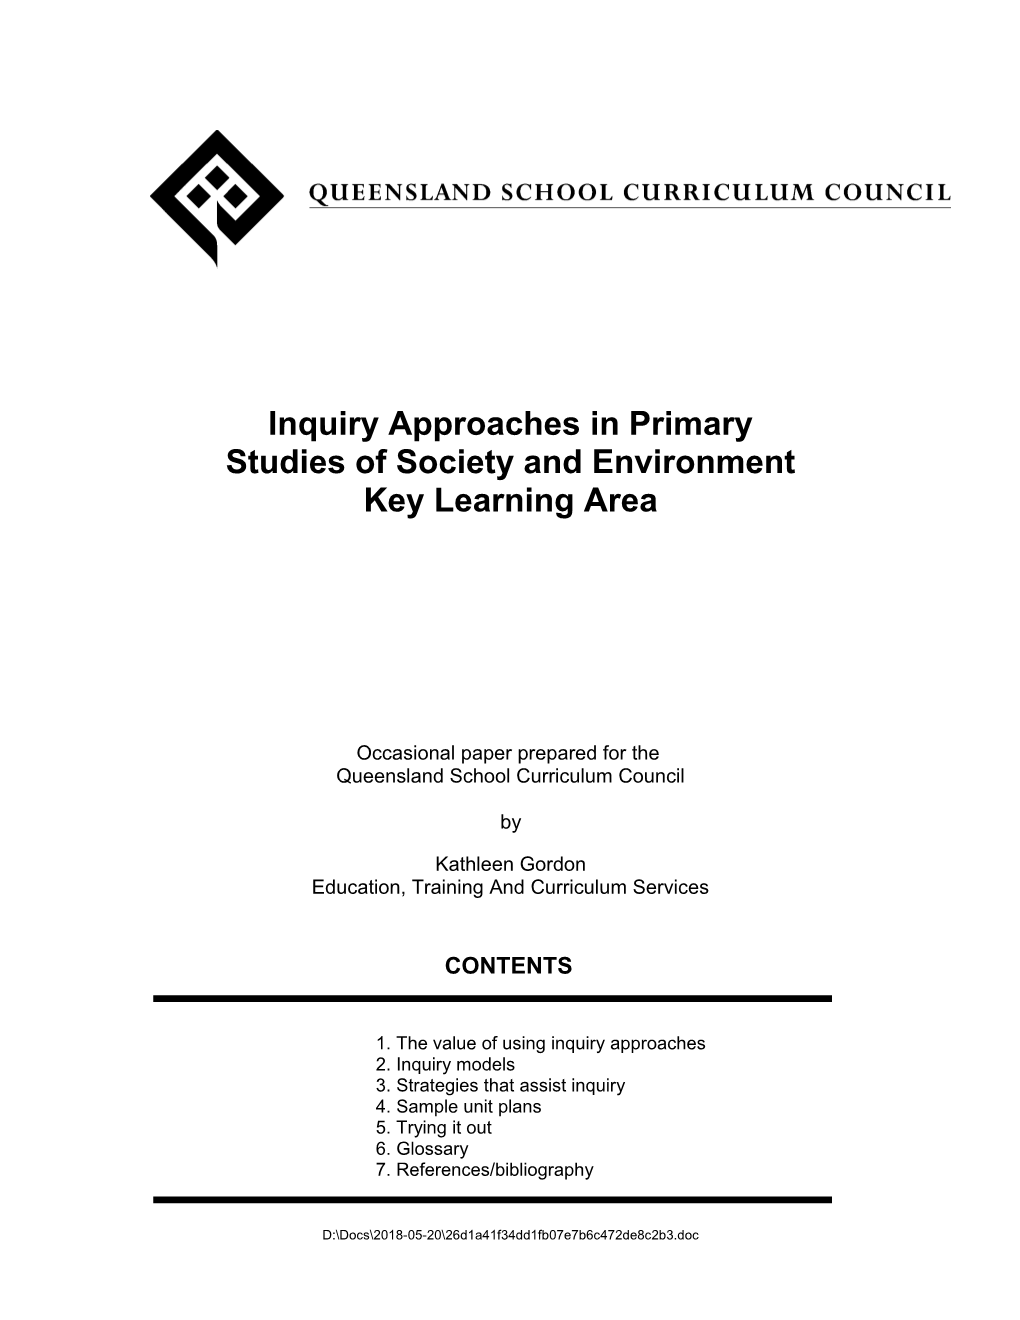 Inquiry Approaches in Primary Studies of Society and Environment Key Learning Area